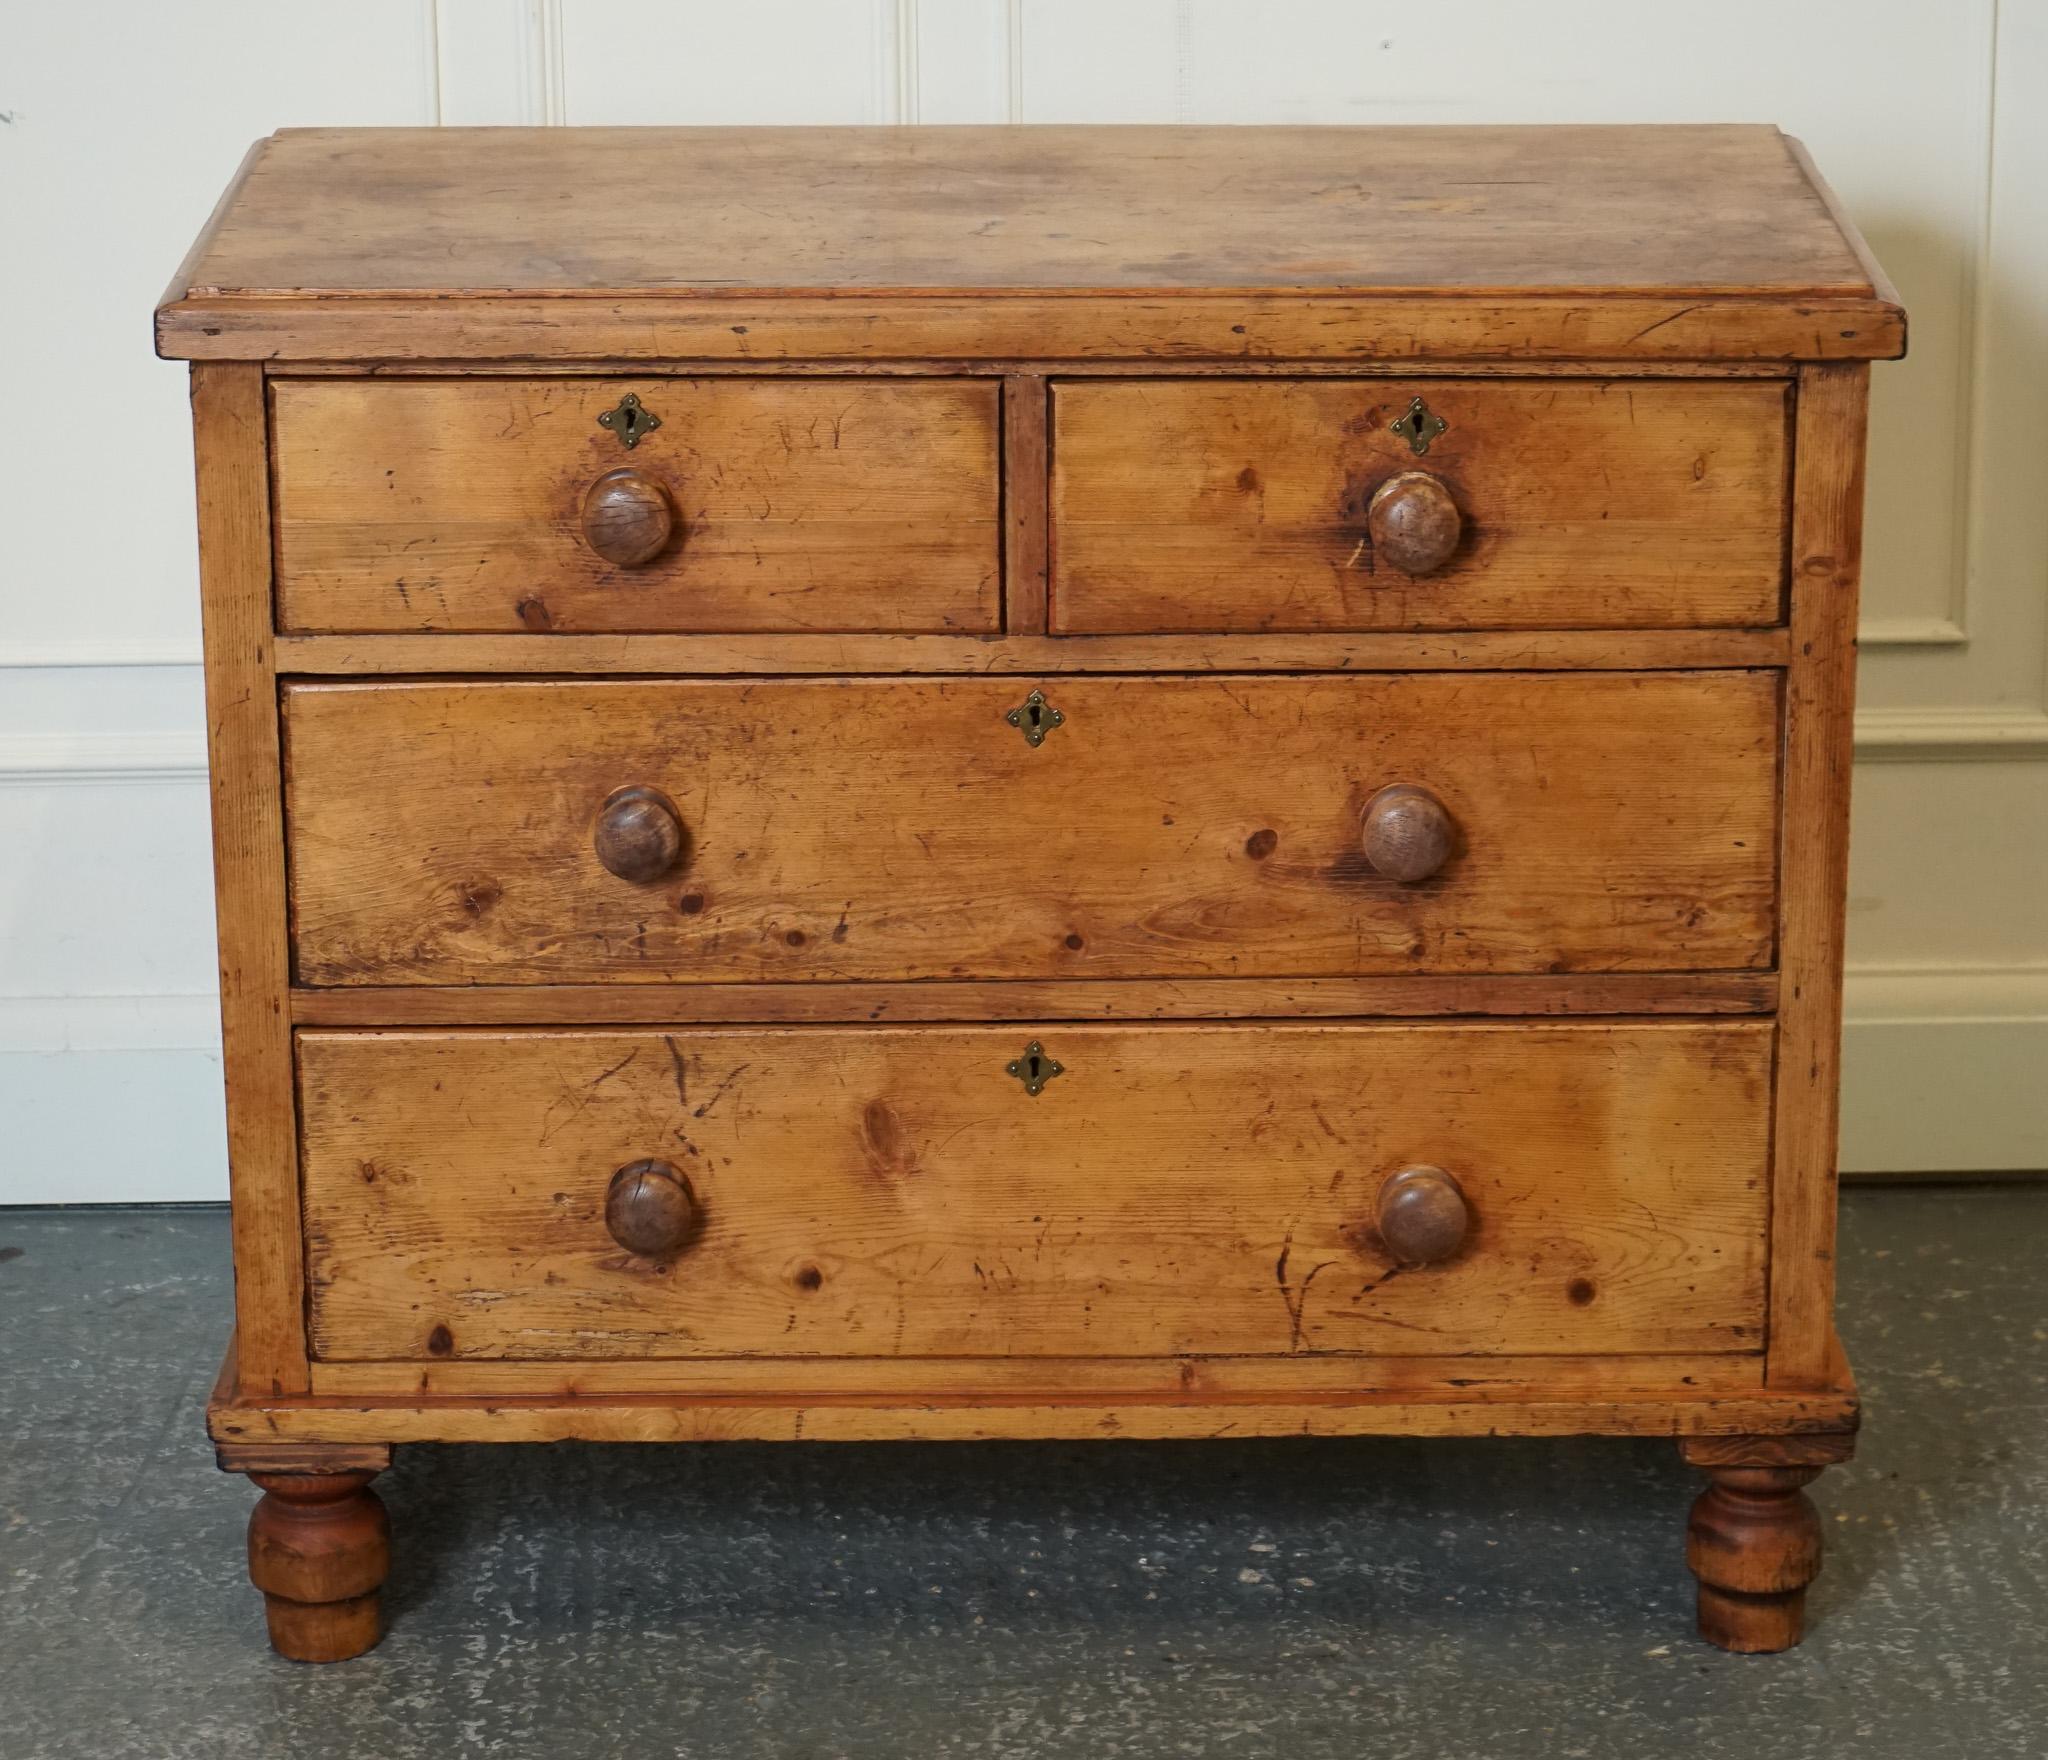 Hand-Crafted ANTIQUE LATE VICTORIAN PINE CHEST OF DRAWERS WITH ORIGiNAL TURNED WOODEN HANDLES